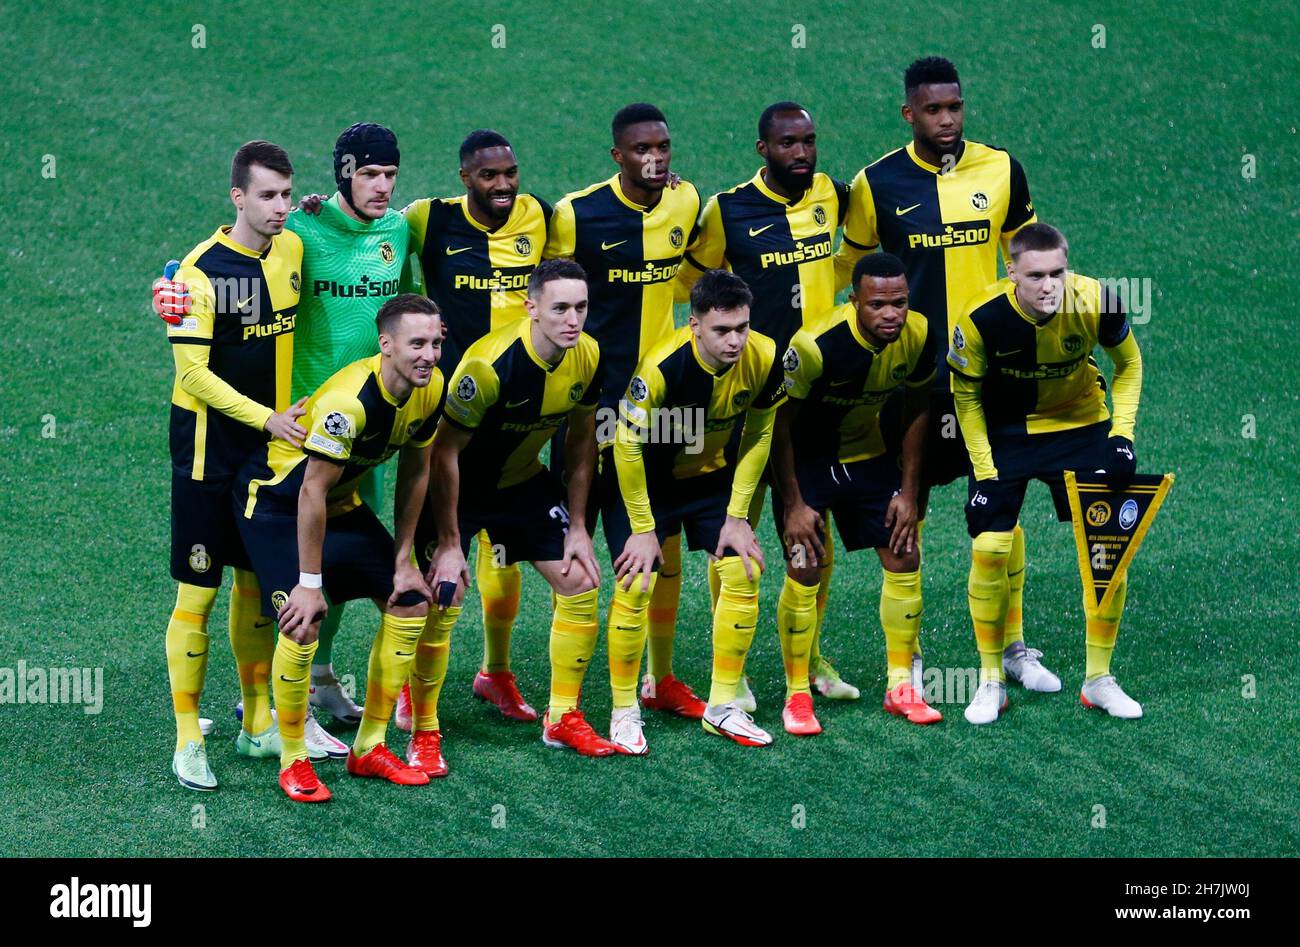 Soccer Football - Champions League - Group F - BSC Young Boys v Atalanta -  Stadion Wankdorf, Bern, Switzerland - November 23, 2021 BSC Young Boys  players pose for a team group